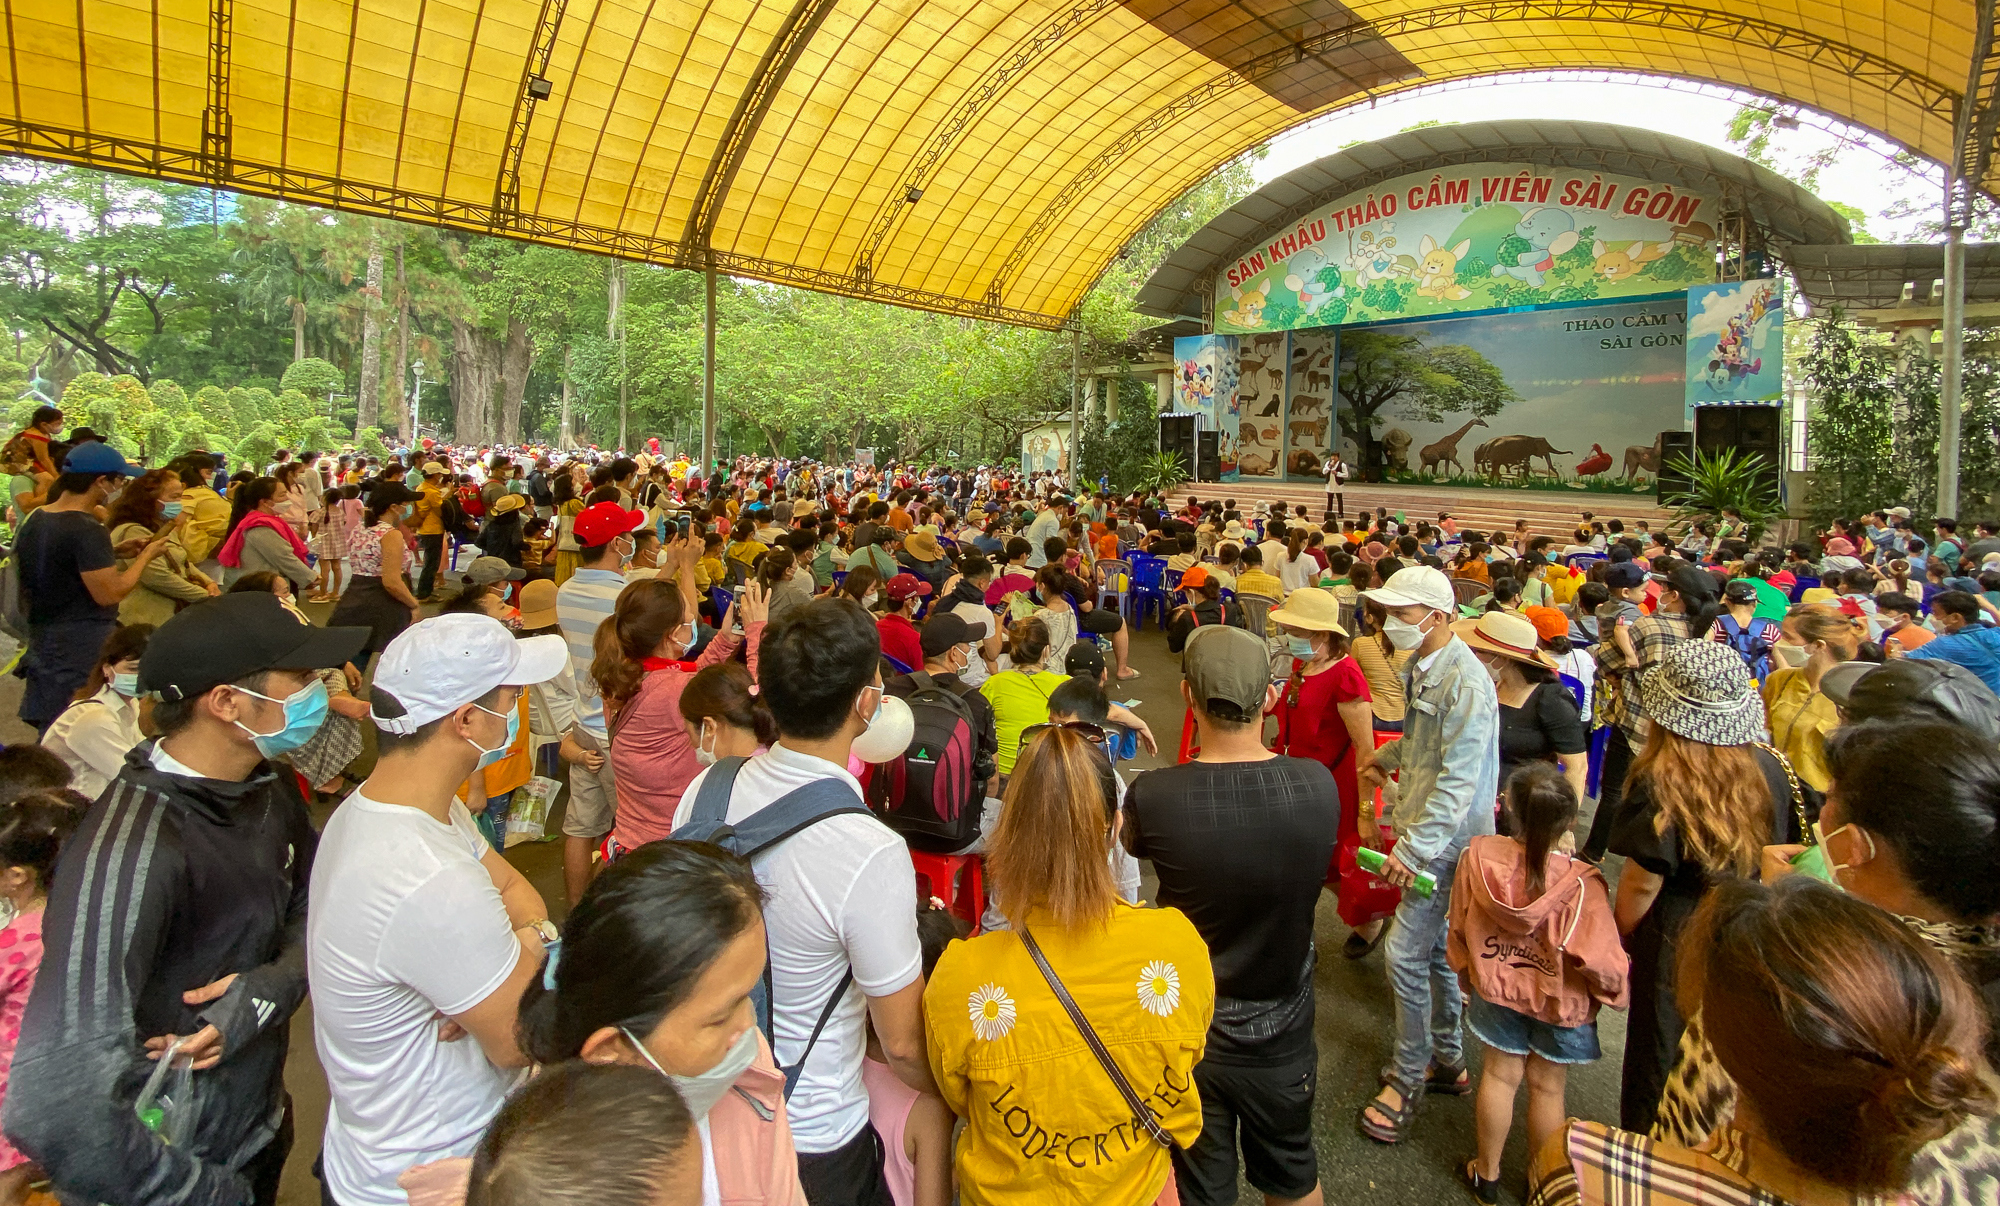 Saigon Zoo and Botanical Garden was crowded with people, guests brought suitcases to camp on the occasion of Hung King's death anniversary - Photo 4.